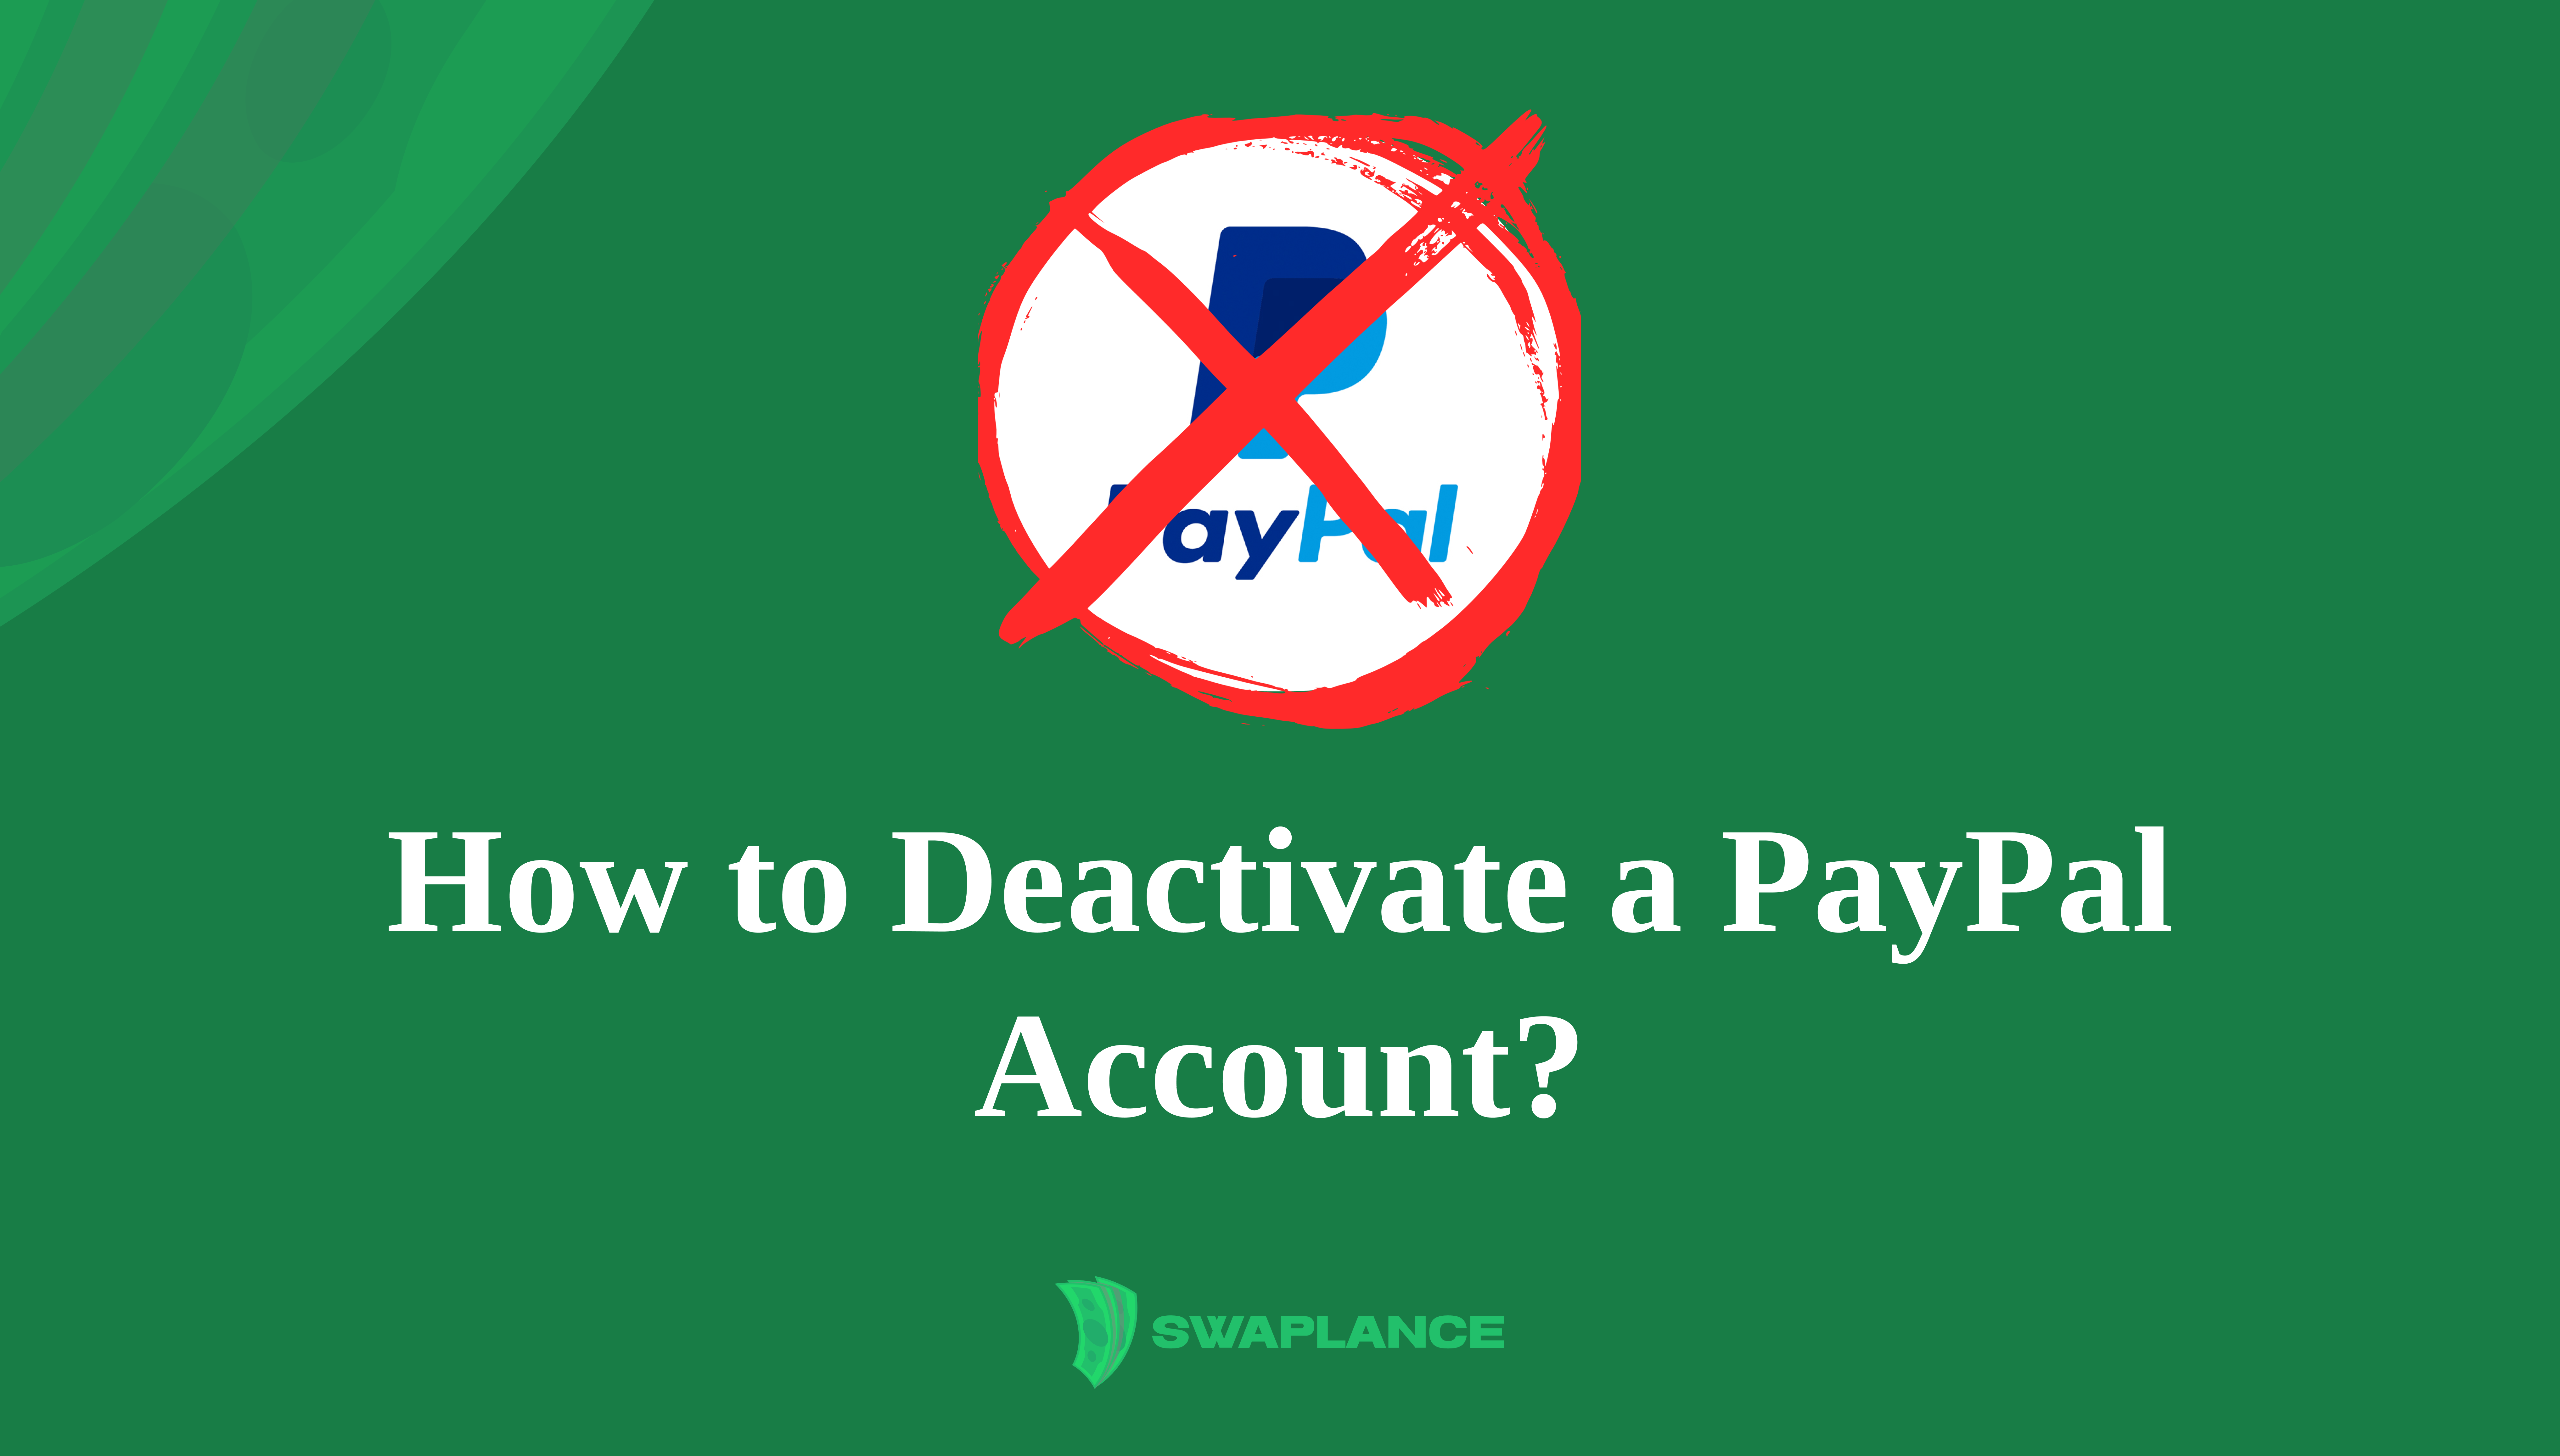 How to Deactivate a PayPal Account?